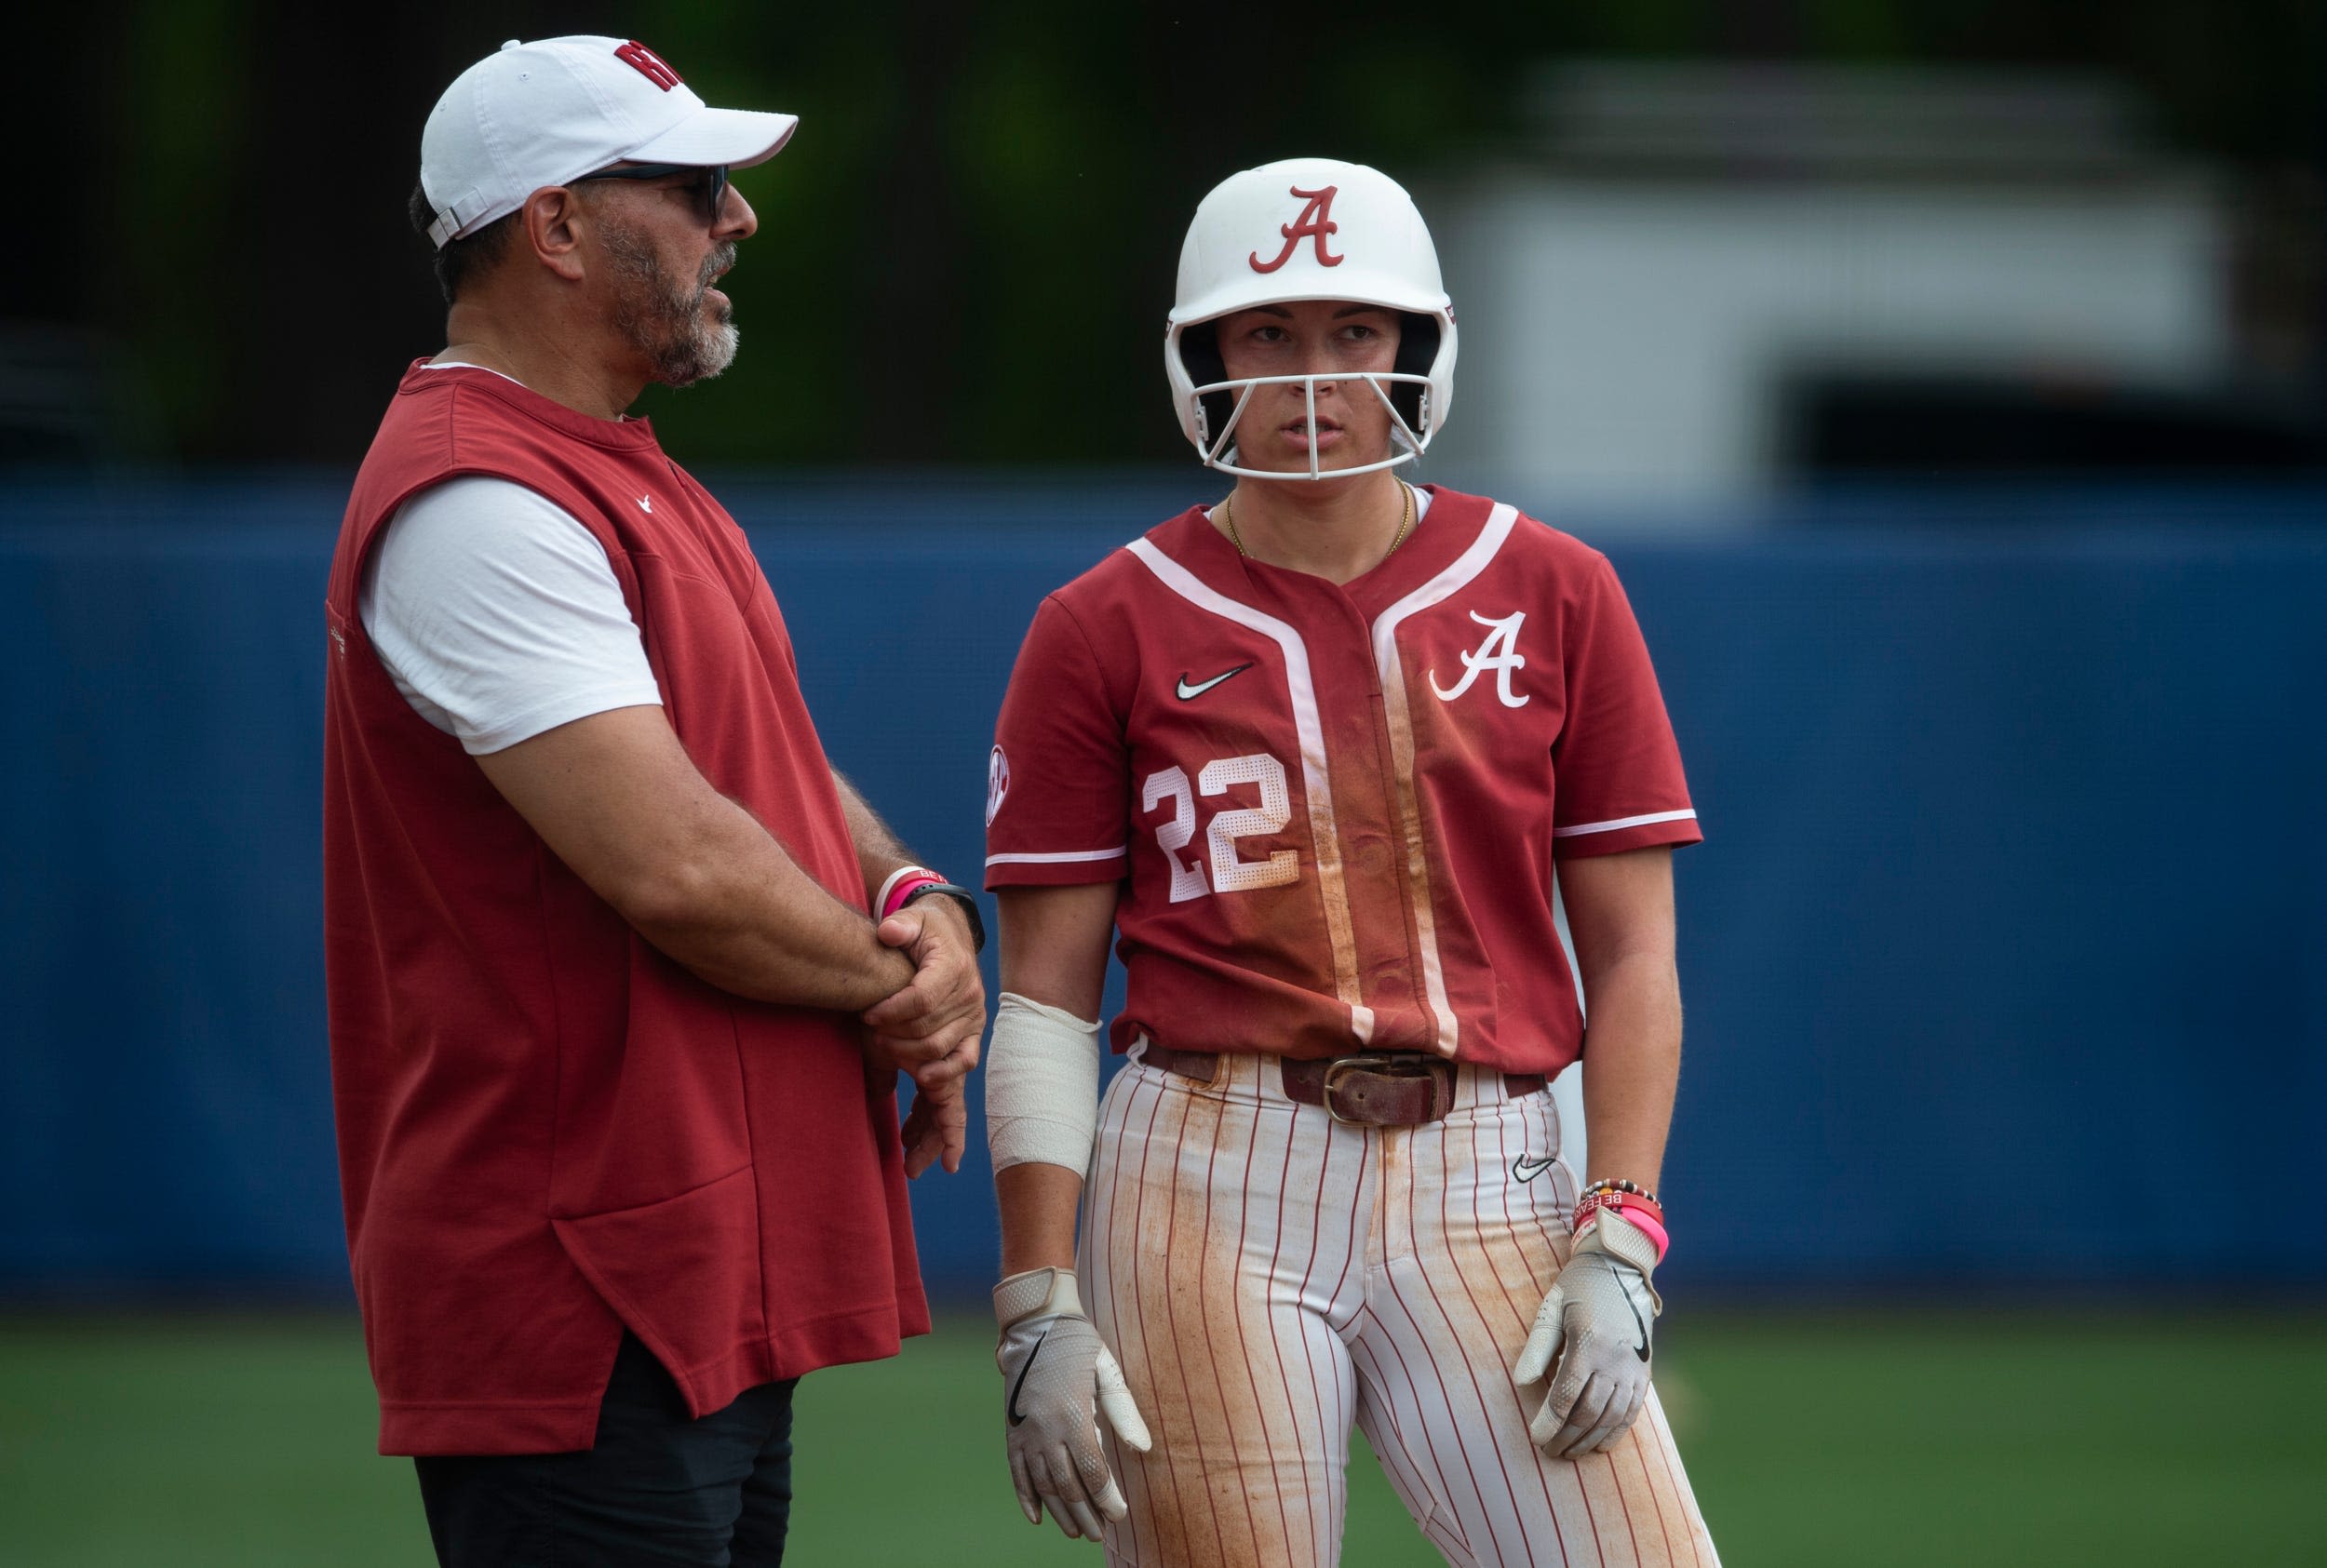 Alabama softball falls in extra innings to LSU in first round of SEC Tournament